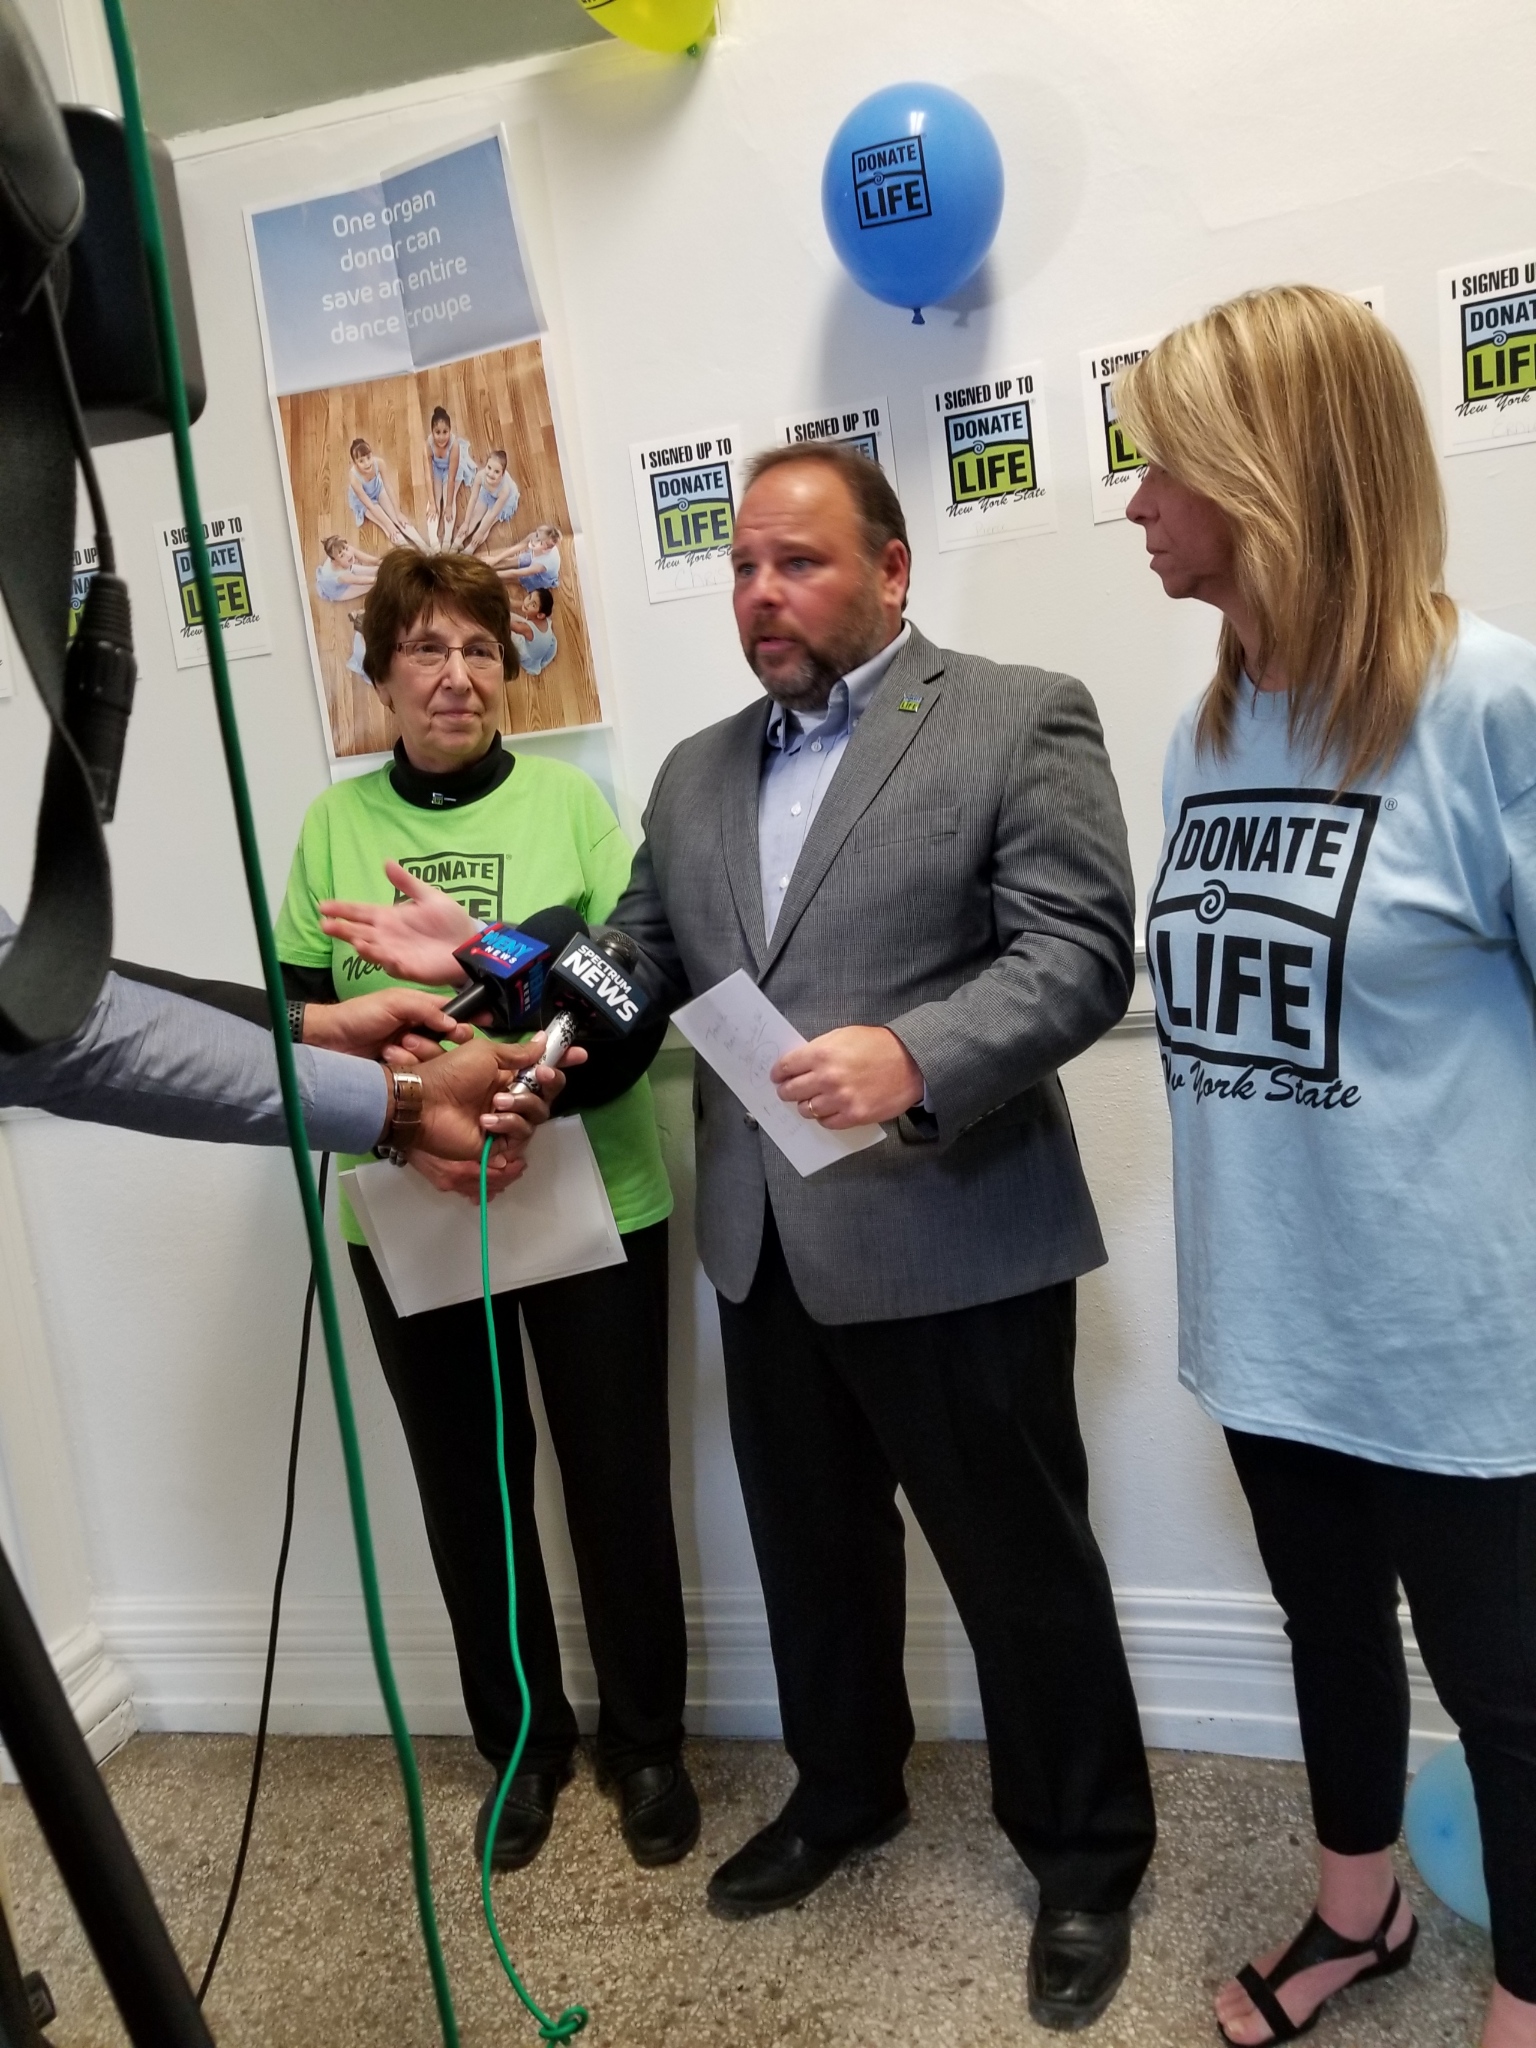 Assemblyman Palmesano speaking to reporters with Steuben County Clerk Judith Hunter pictured to the left and Deputy County Clerk Susan Cranmer pictured to the right.